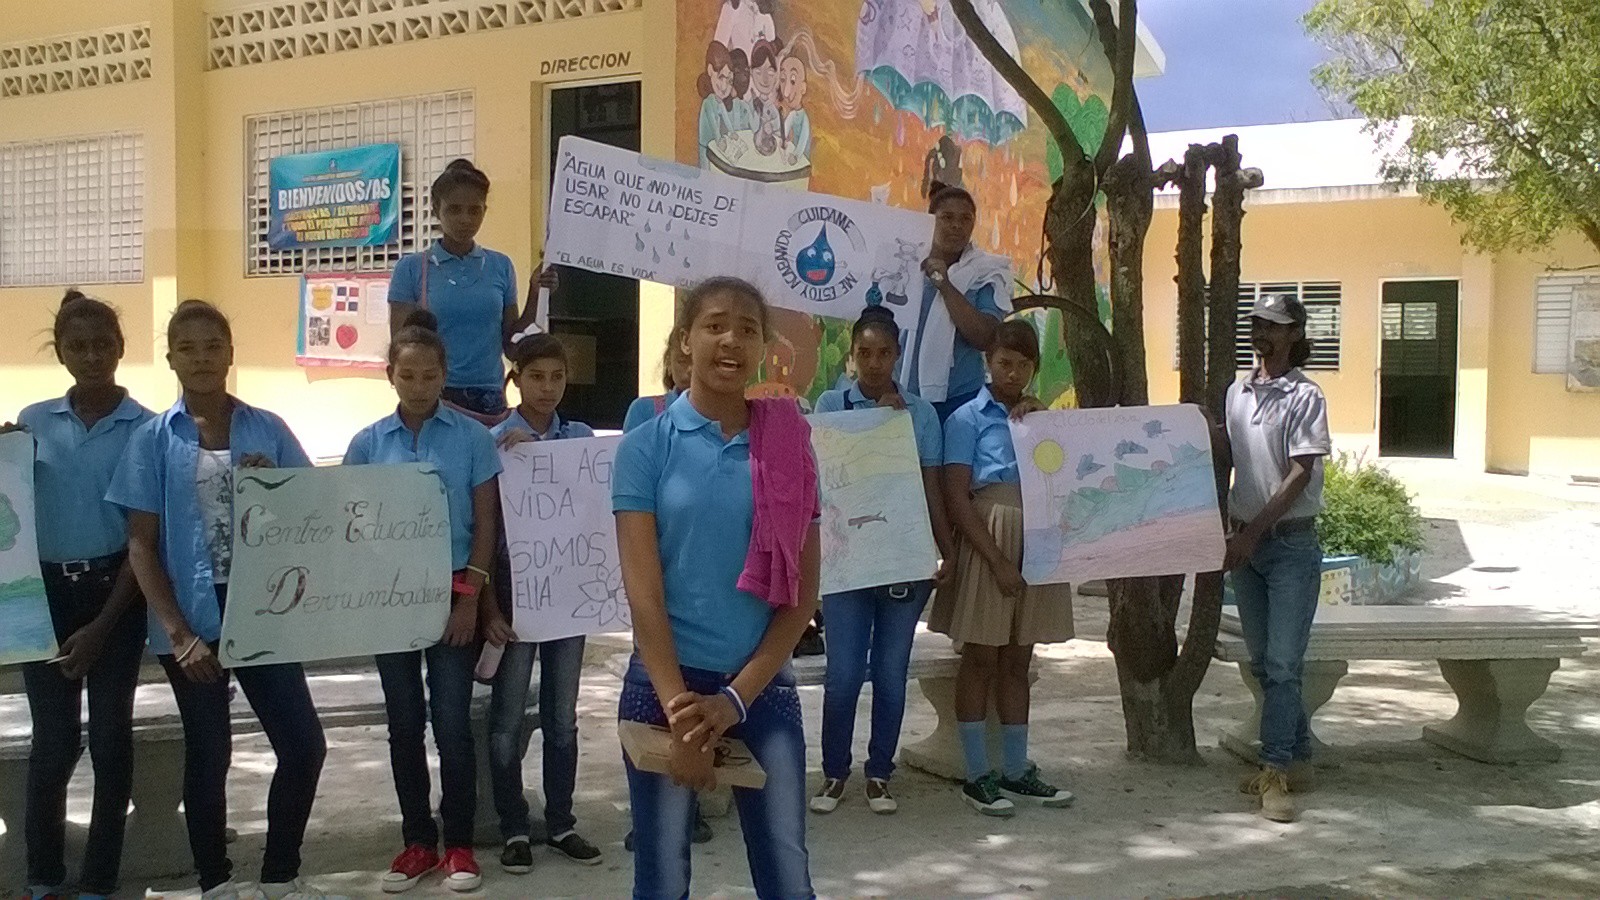 Children presenting an exposition on climate change and water conservation.